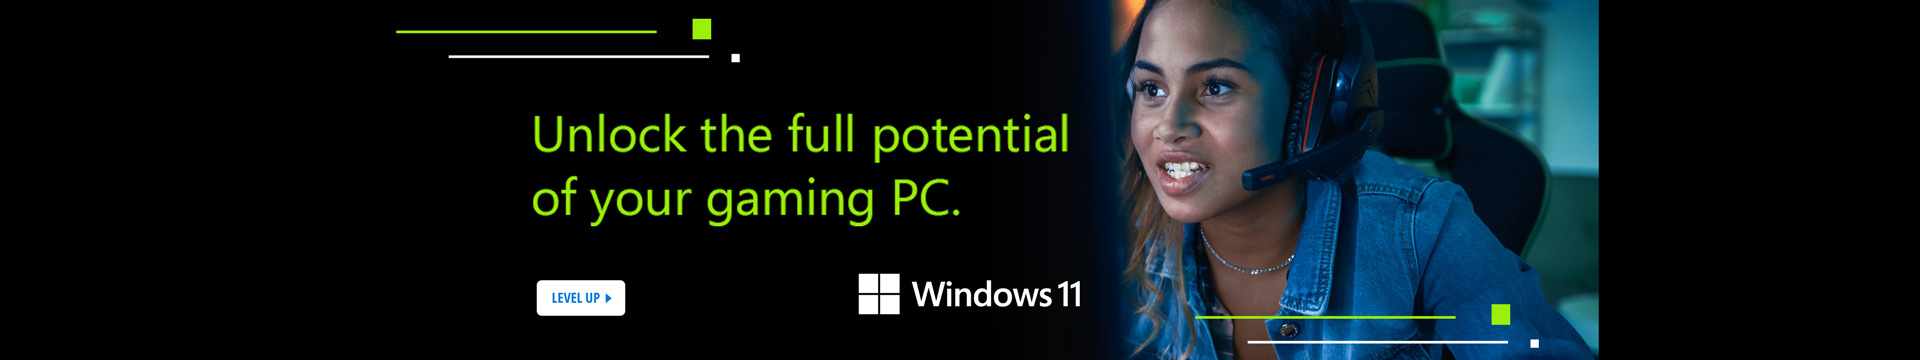 Unlock the full potential of your gaming PC